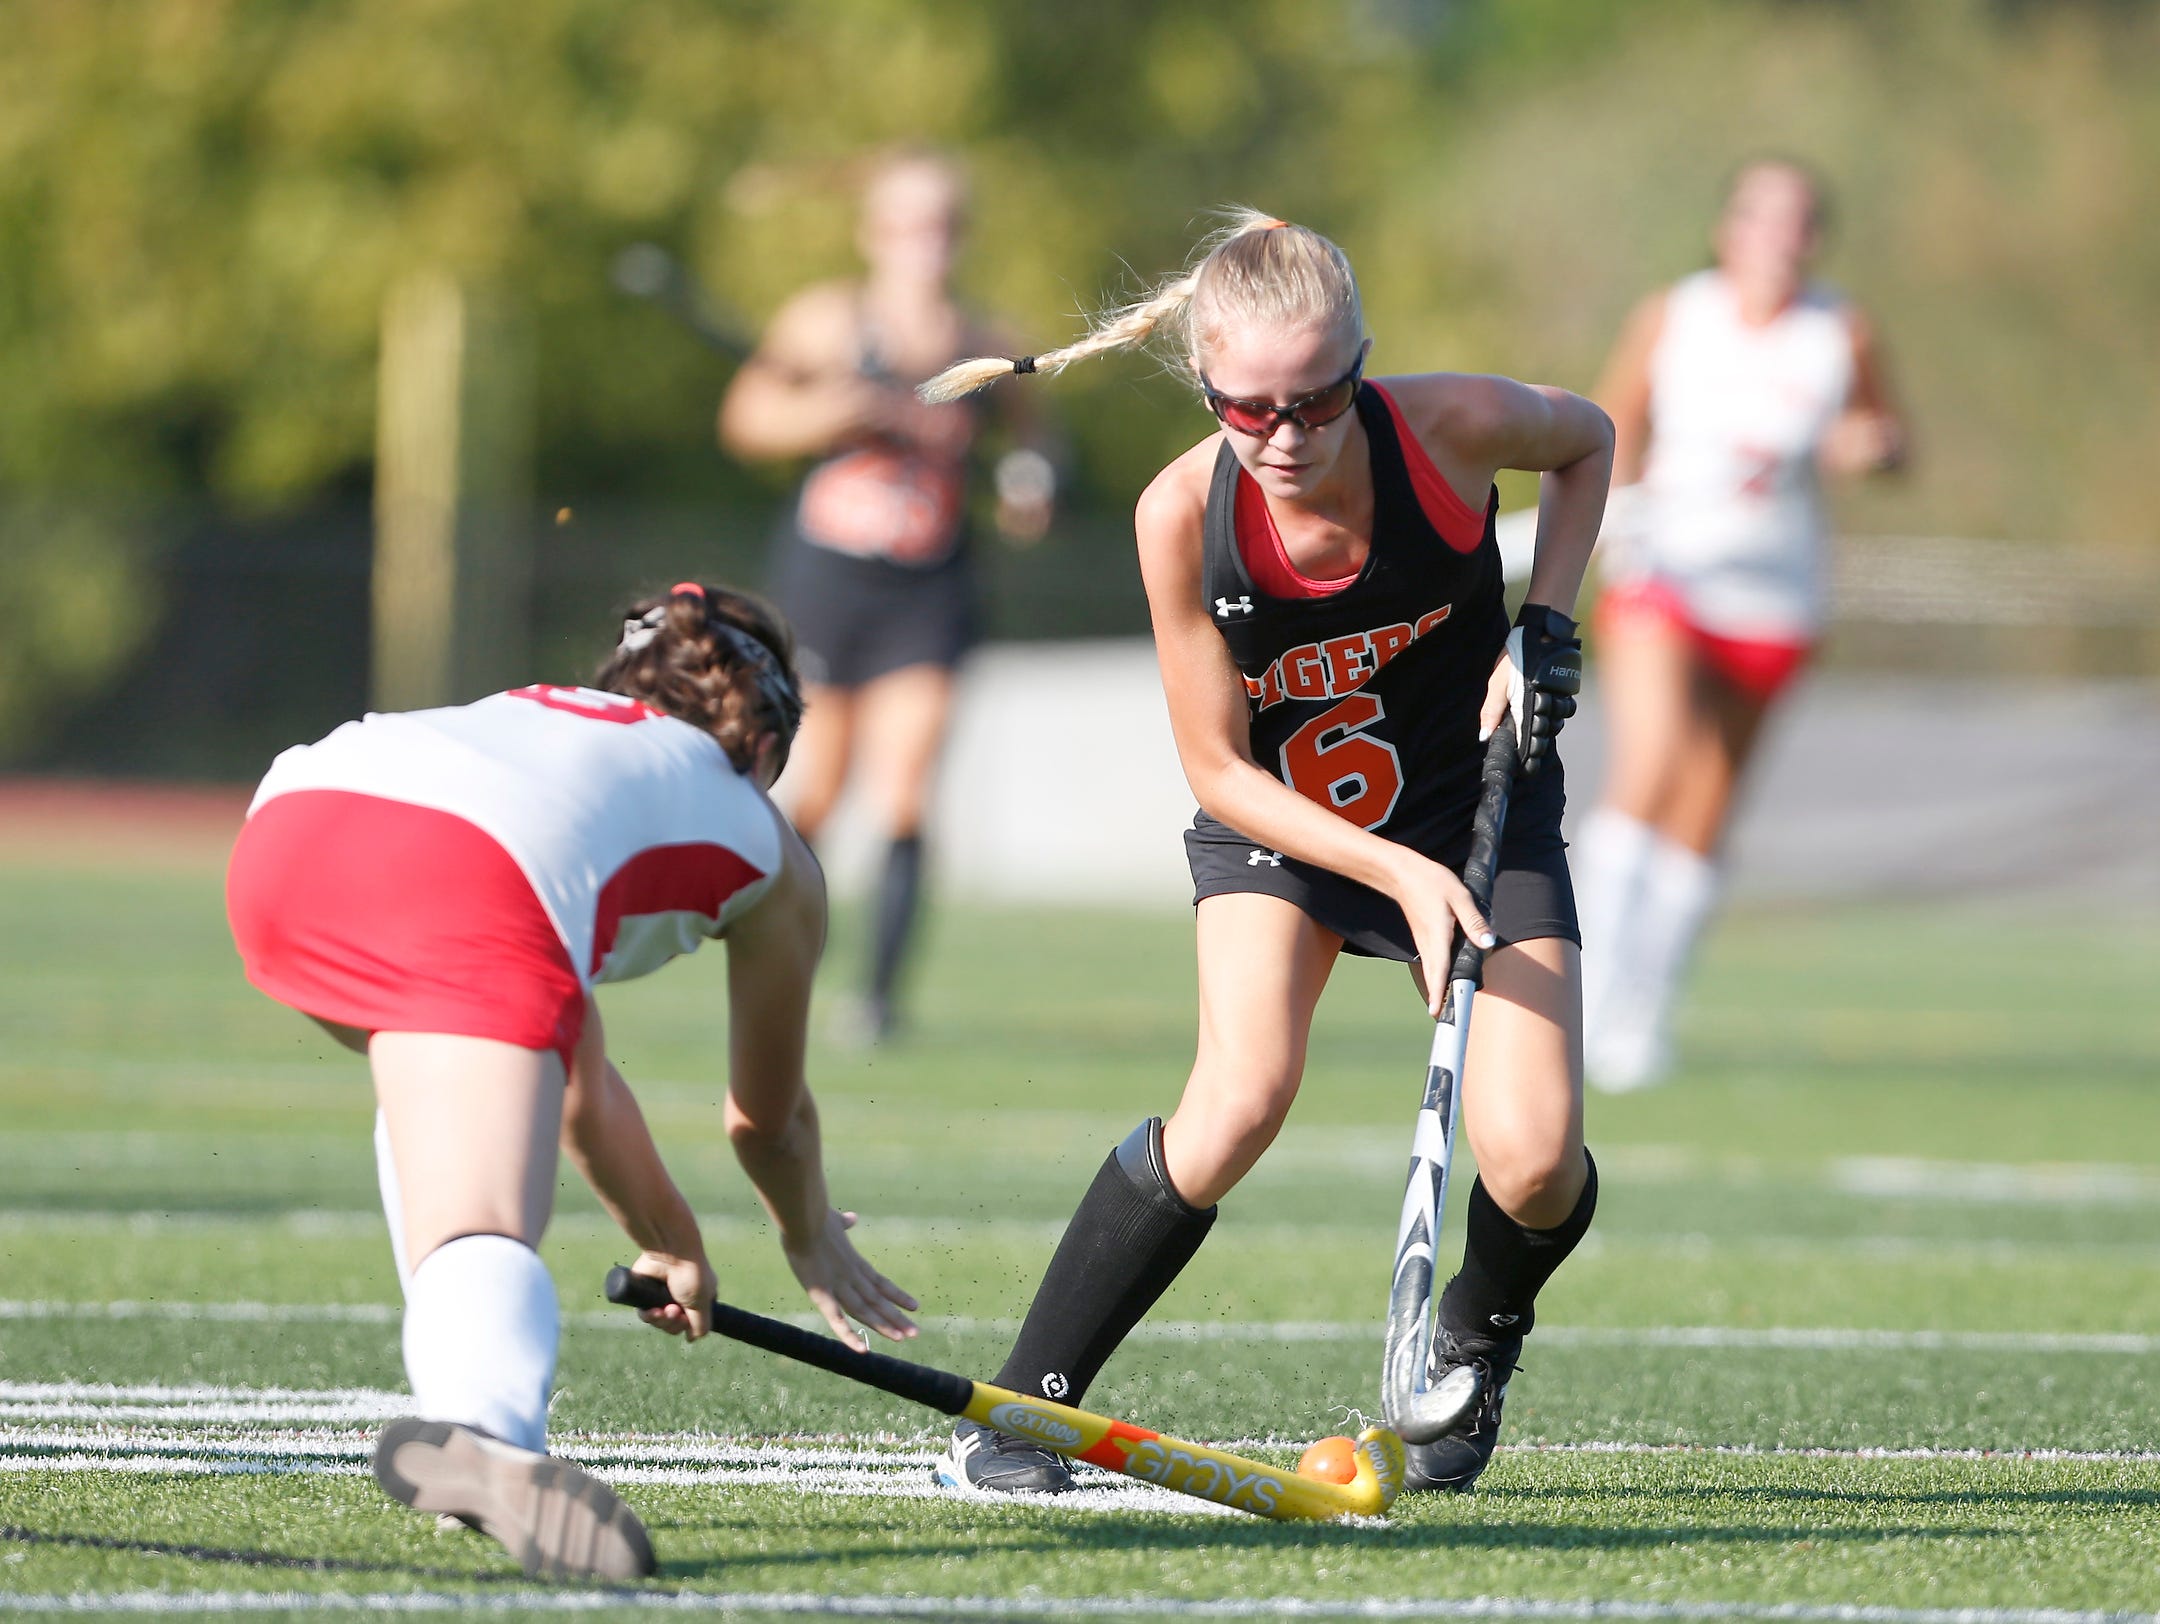 Mamaroneck's Elizabeth Brisette (6) works the ball during field hockey action against Fox Lane at Fox Lane High School in Bedford on Tuesday, September 13, 2016. Mamaroneck won 6-0 with Brisette scoring 4 goals.